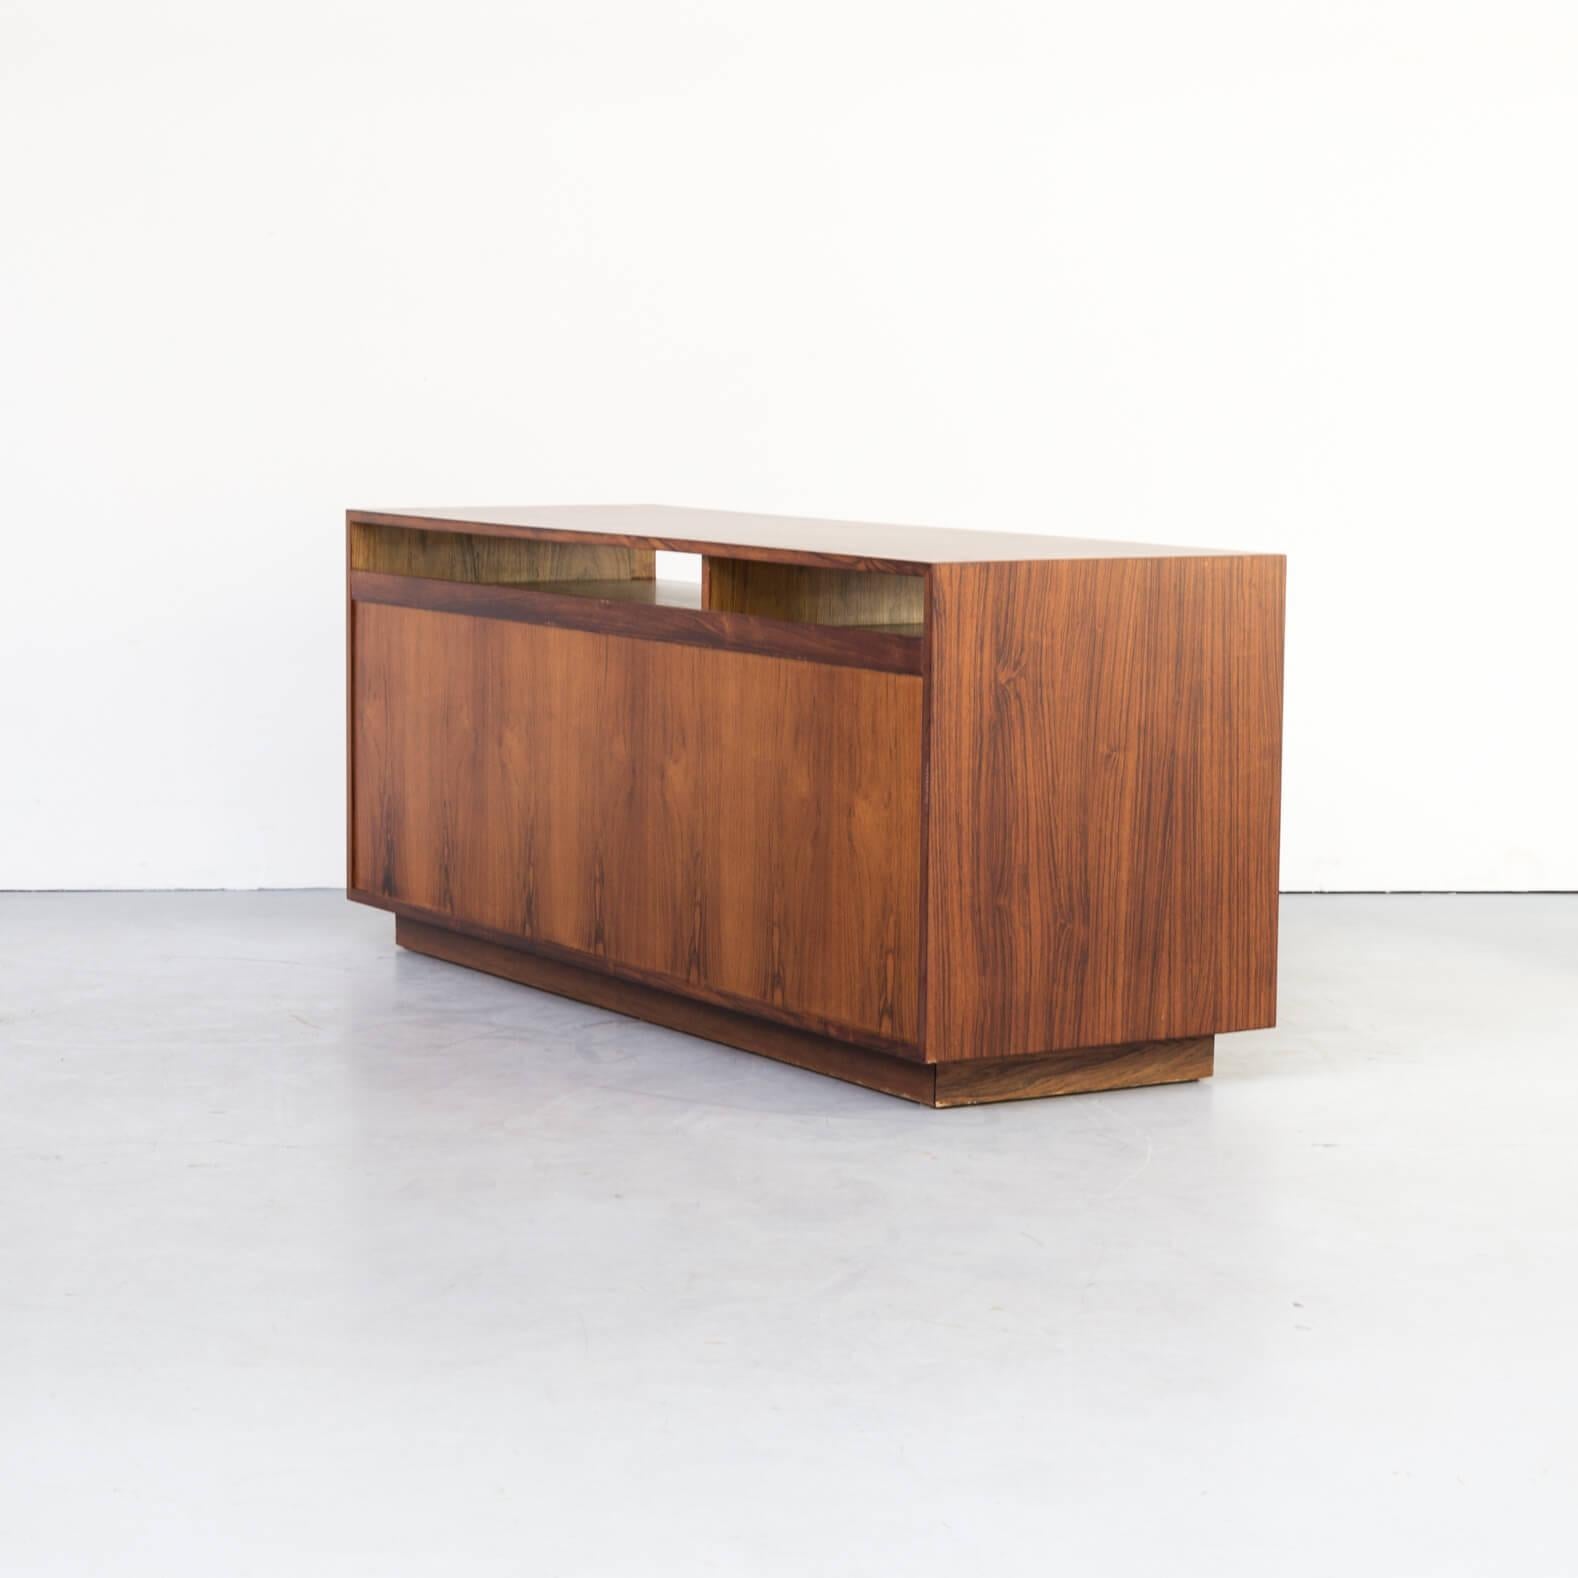 1960s Finn Juhl Rosewood Side, Lowboard from the Diplomat Series for Cado For Sale 1